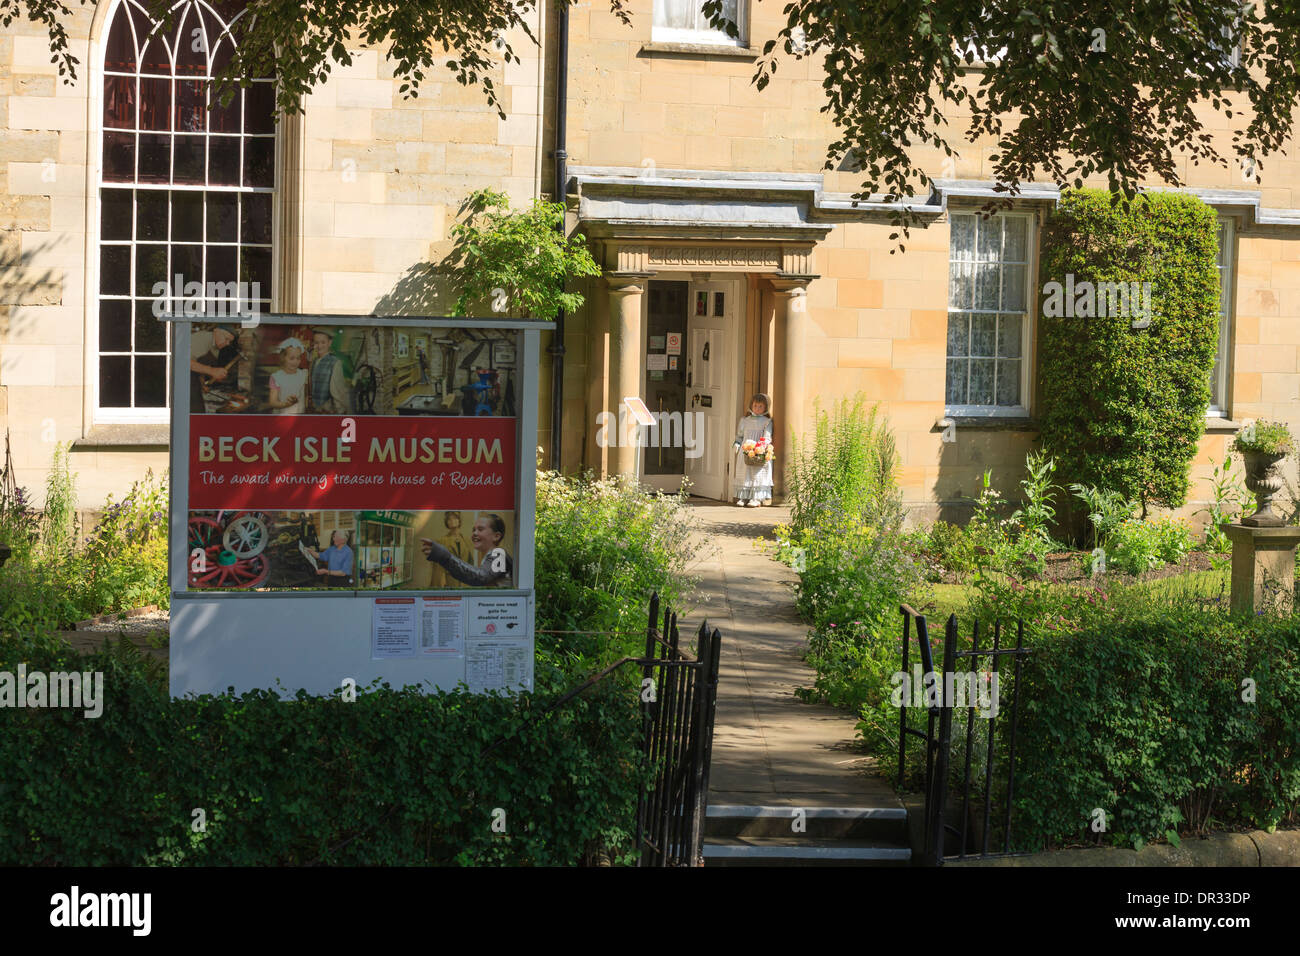 Beck Isle Museum of Rural Life Pickering Ryedale North Yorkshire England Stock Photo